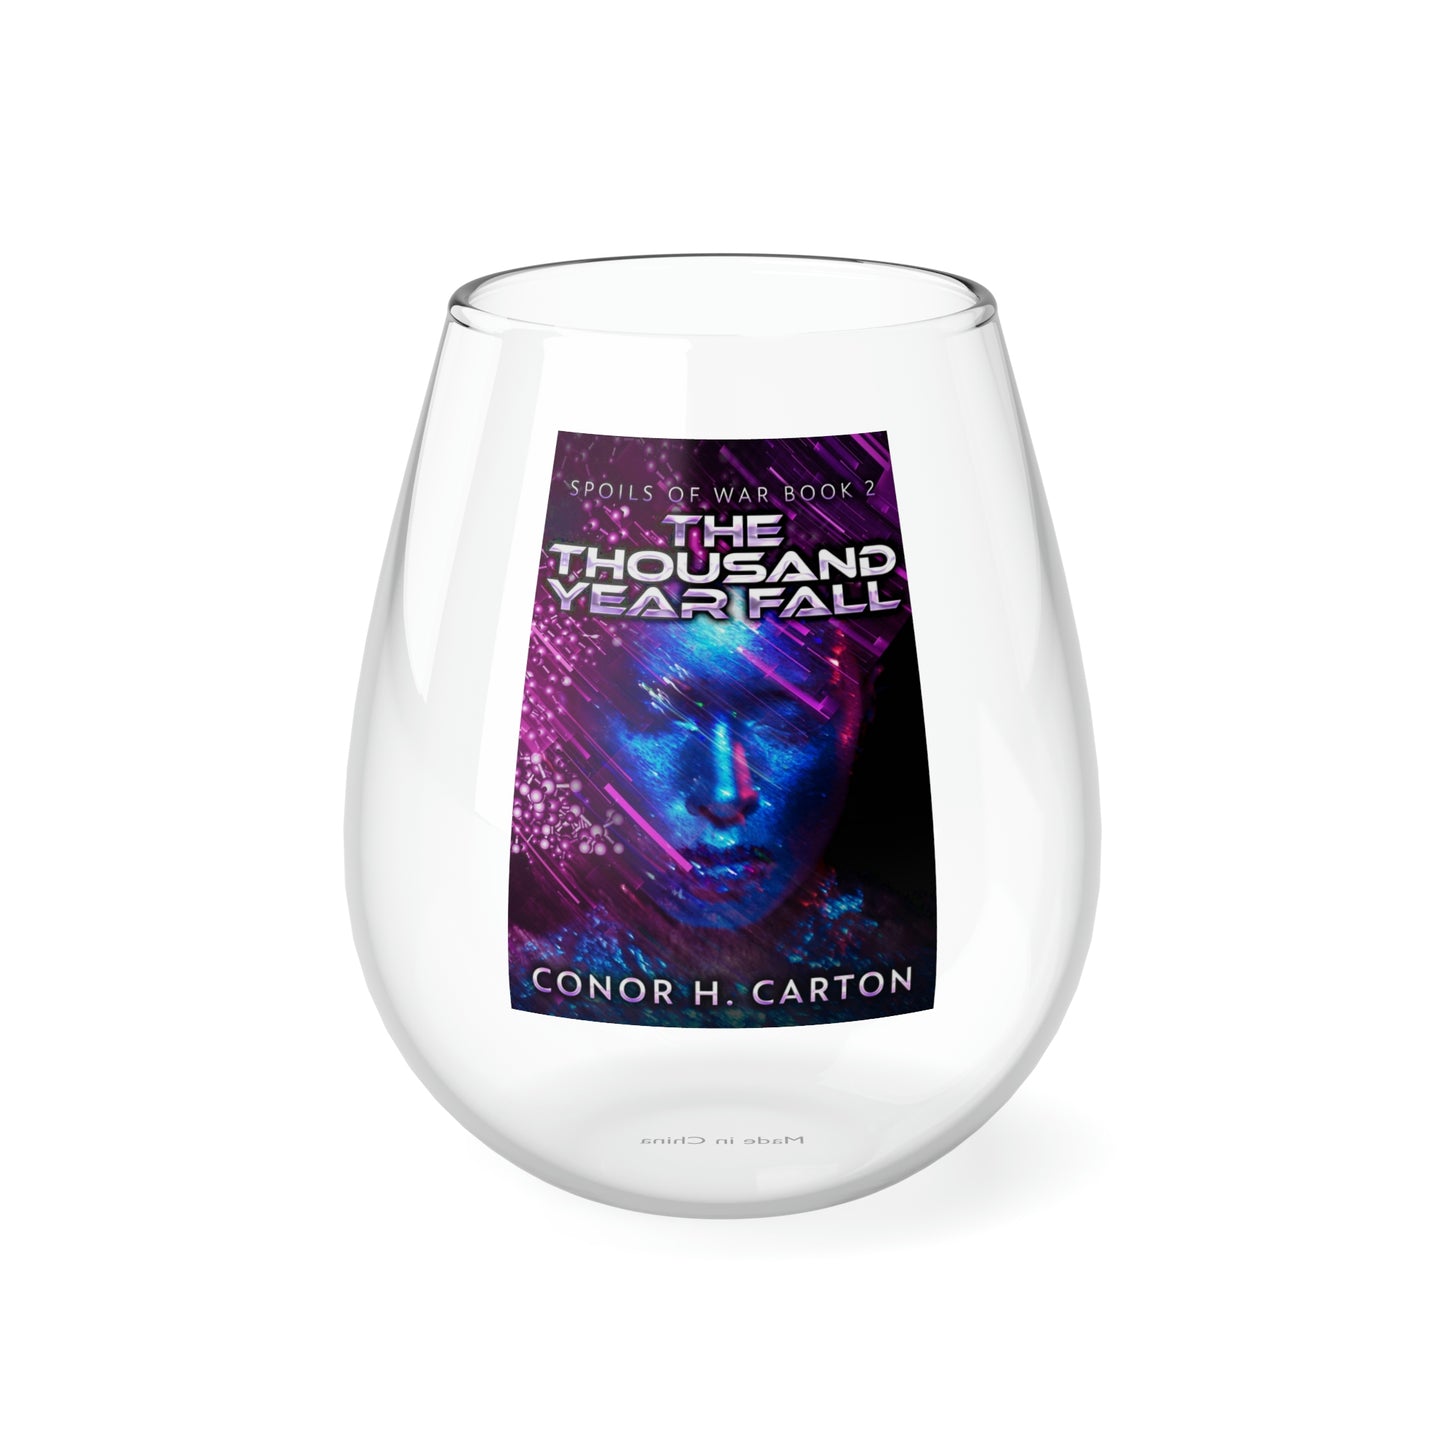 The Thousand Year Fall - Stemless Wine Glass, 11.75oz